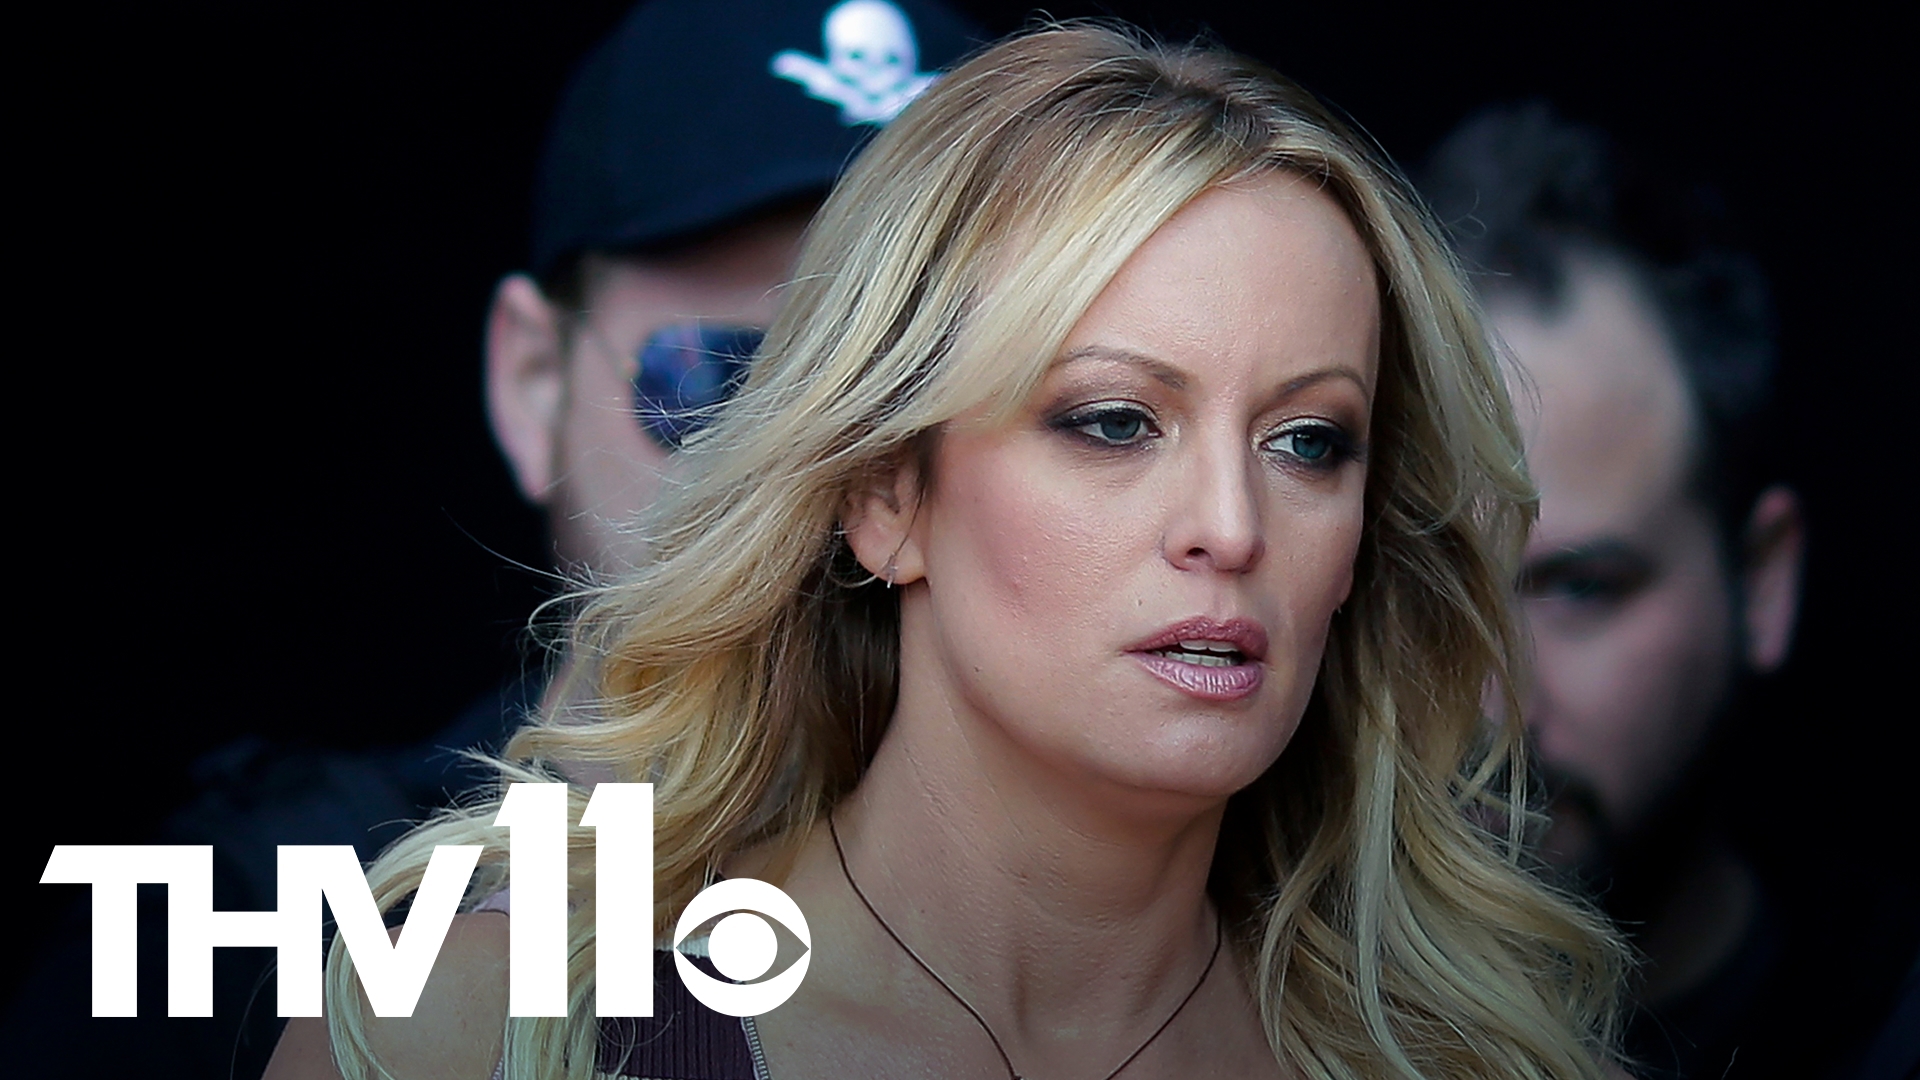 Adult film star Stormy Daniels is on the witness stand again in former President Donald Trump’s trial in New York where he denies any wrongdoing.